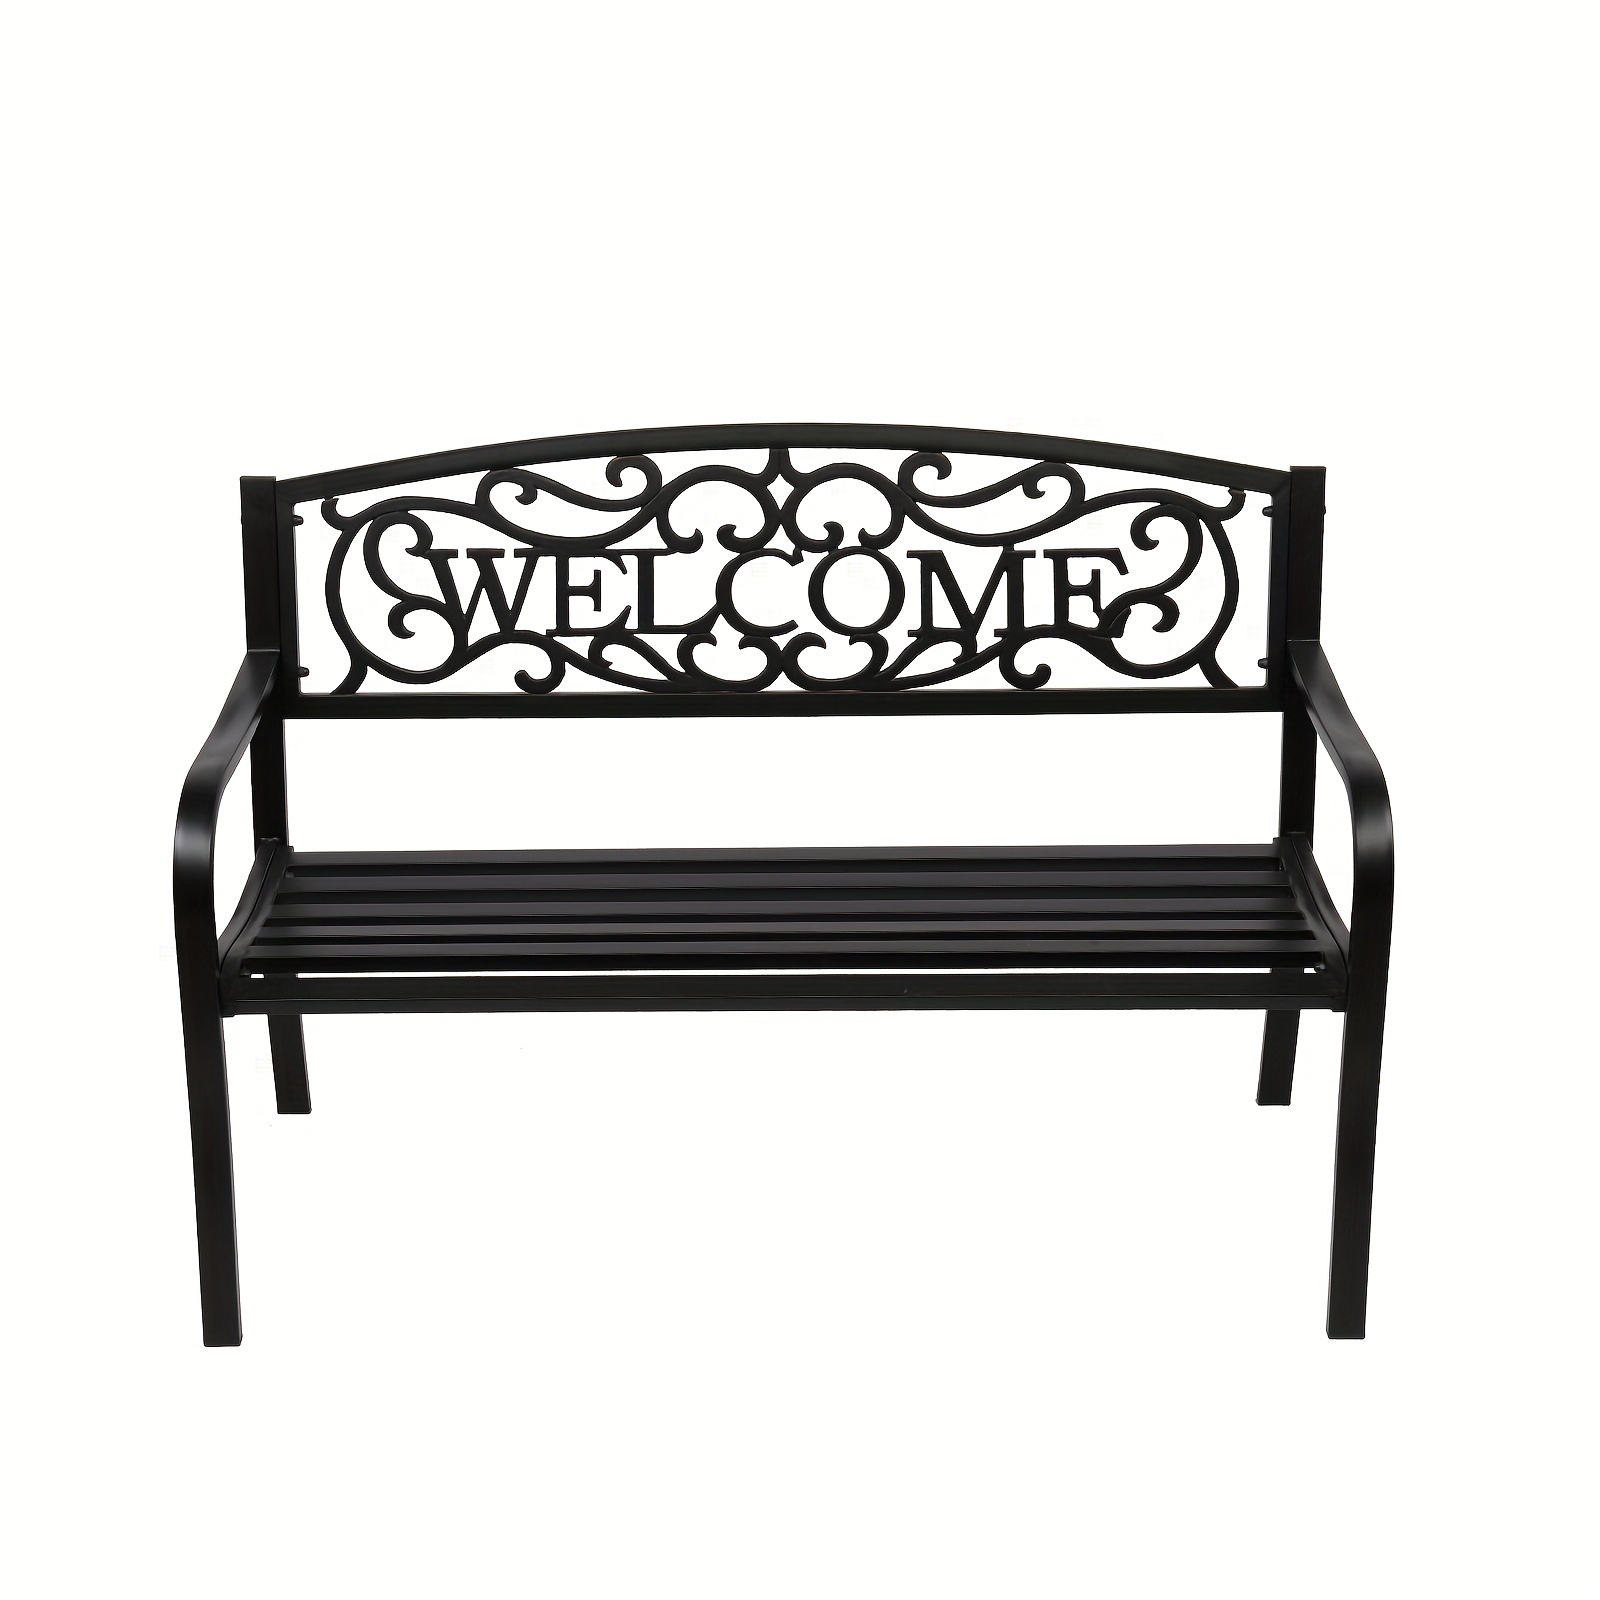 

Ubesgoo Outdoor Steel Garden Bench Park Bench, 50 Inch Patio Welcome Bench With Slated Seat & Floral Design Backrest